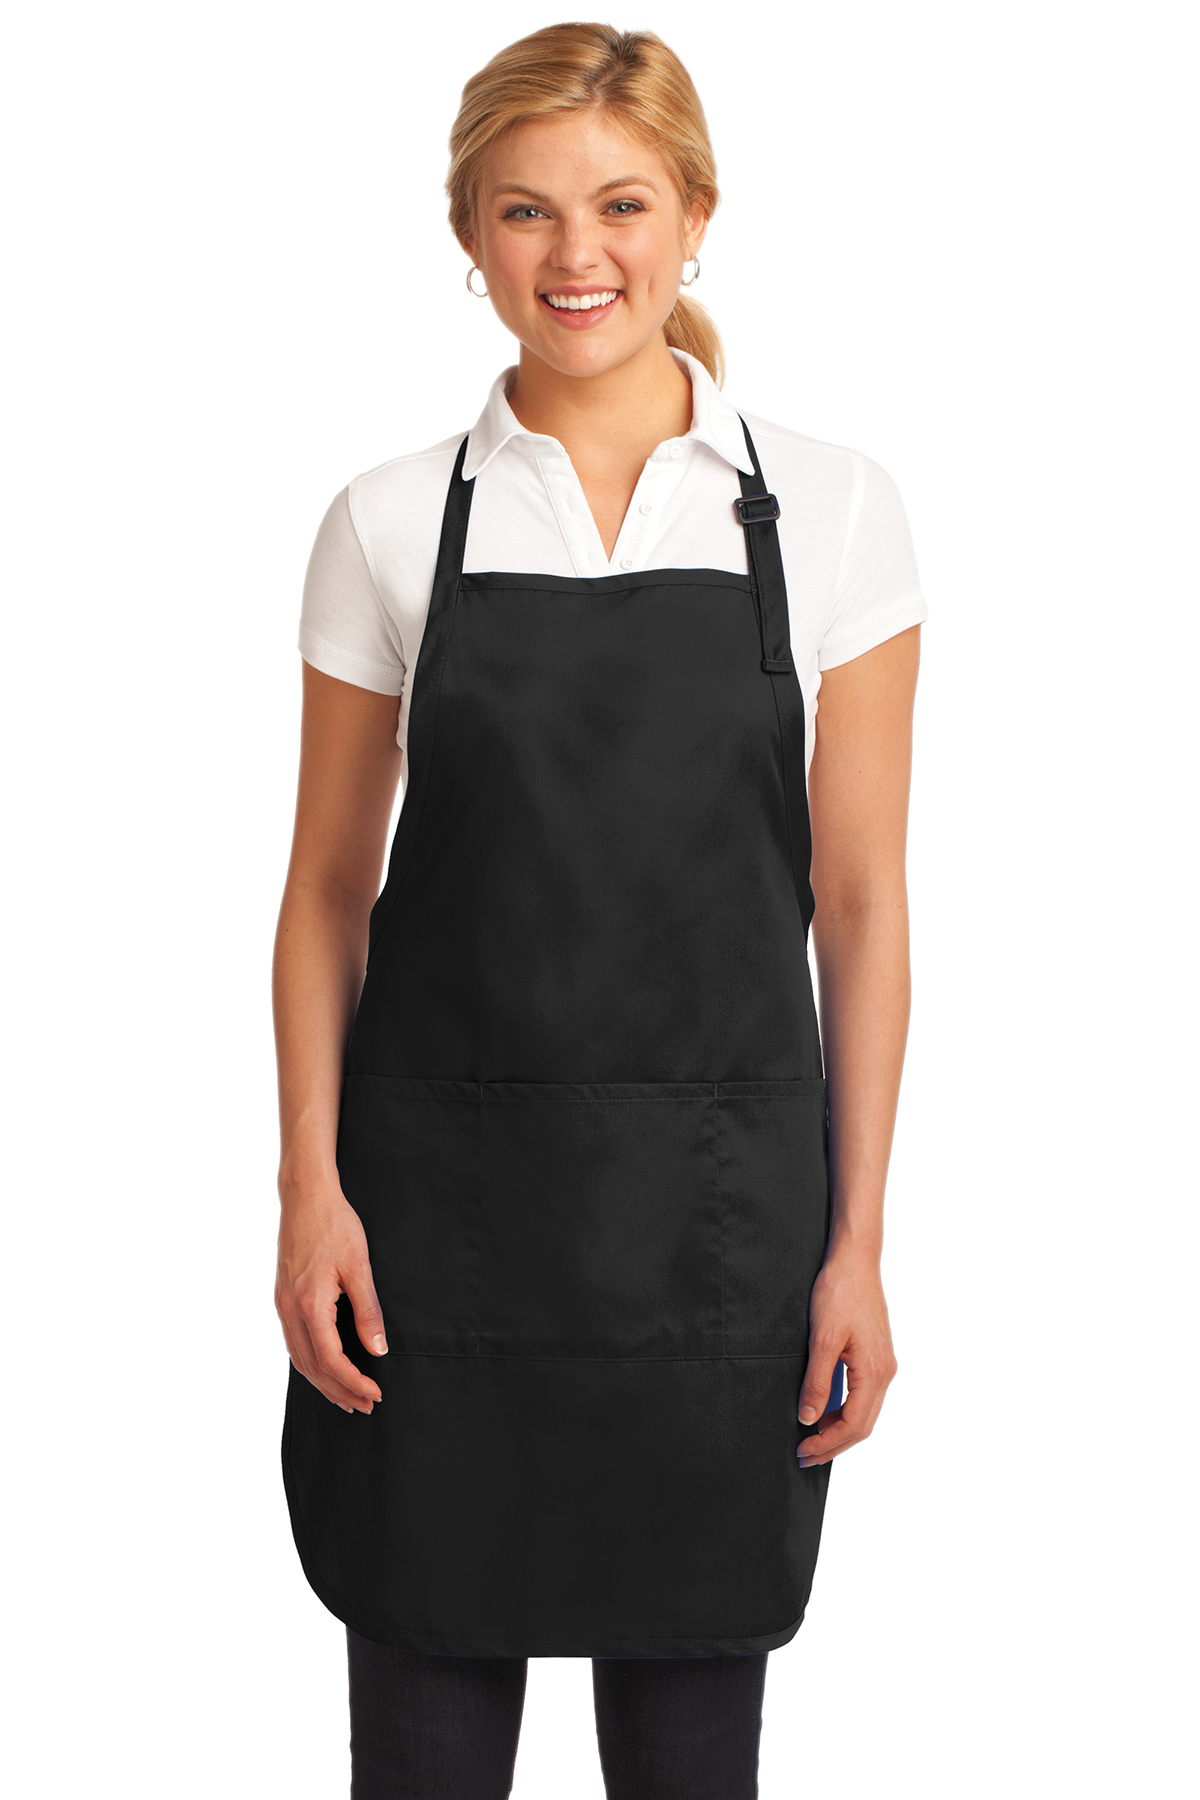 Download Port Authority® Easy Care Full-Length Apron with Stain Release | Aprons | Workwear | SanMar